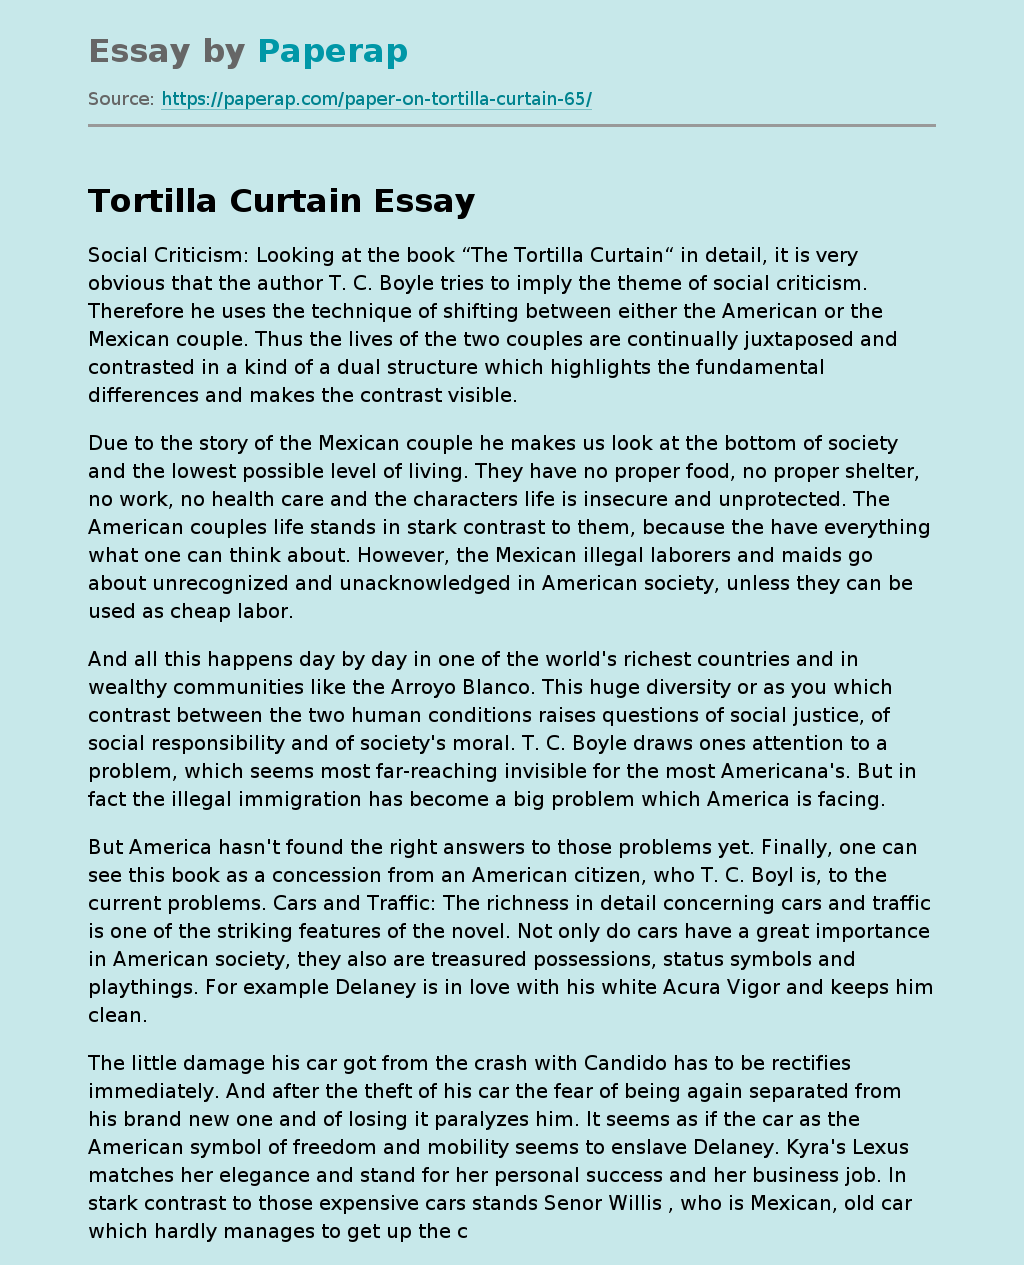 “The Tortilla Curtain“ by TC Boyle